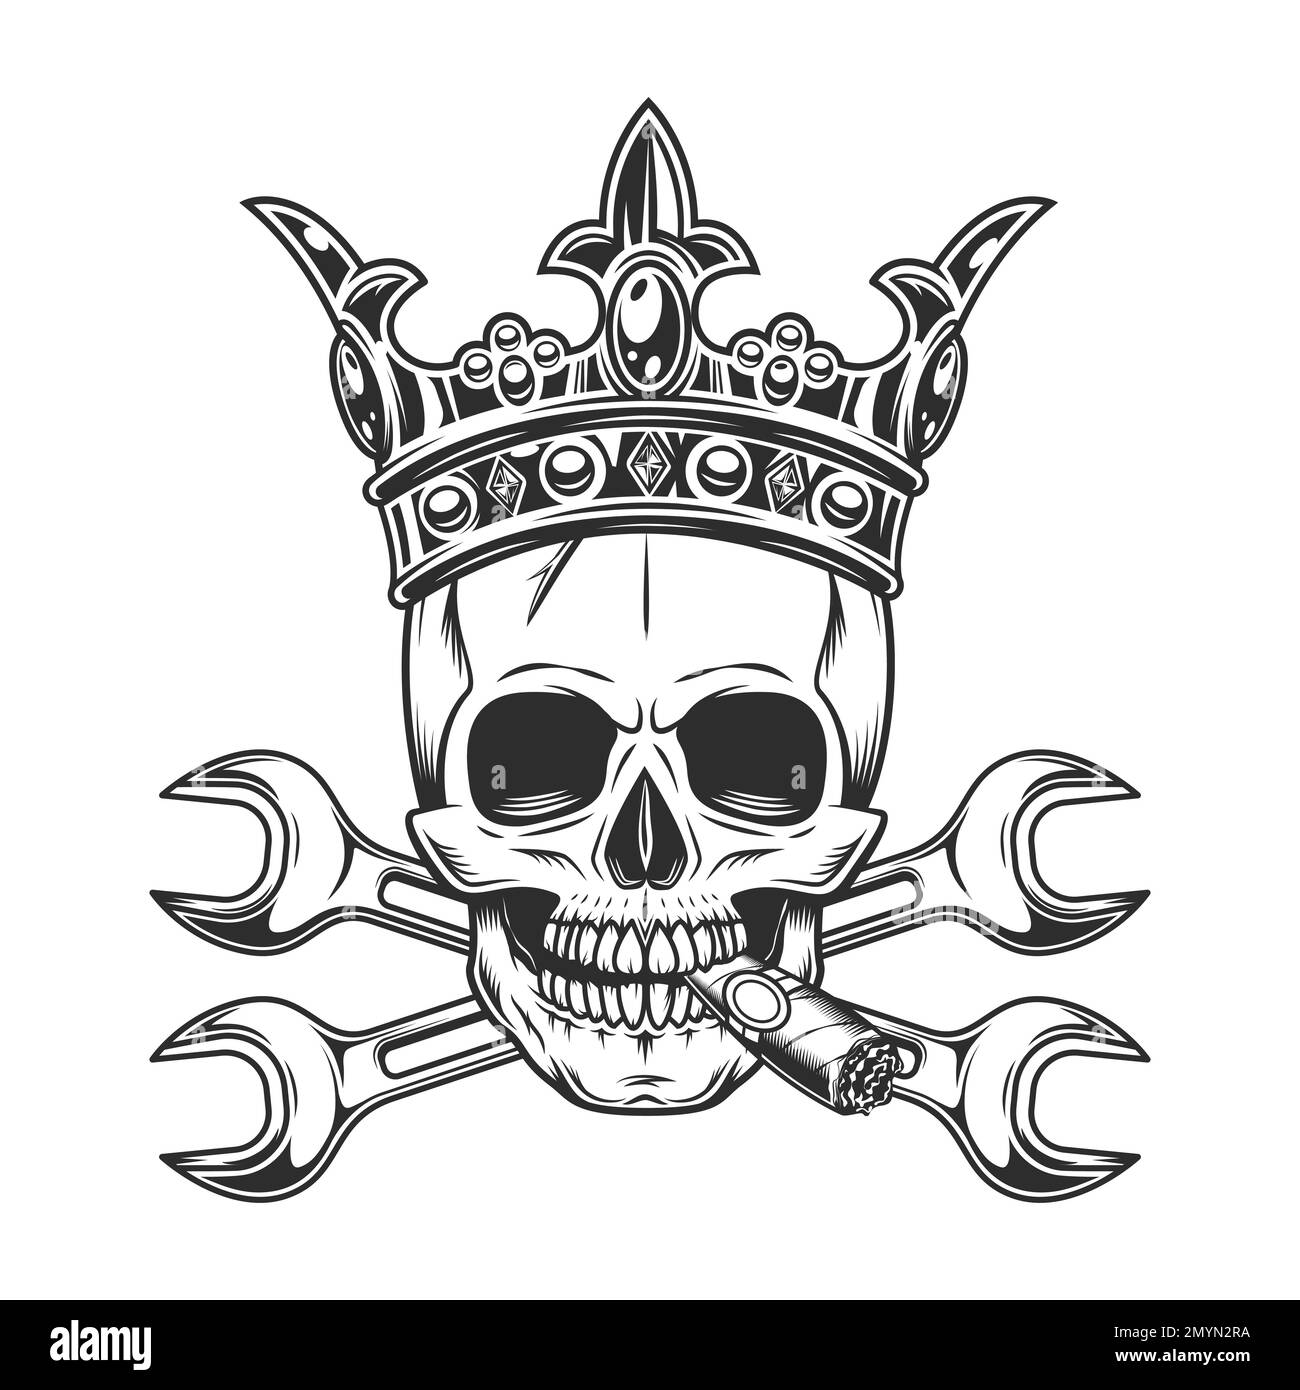 Vintage skull smoking cigar or cigarette smoke in royal crown with body shop service car and truck mechanic repair tool crossed wrench or construction Stock Vector